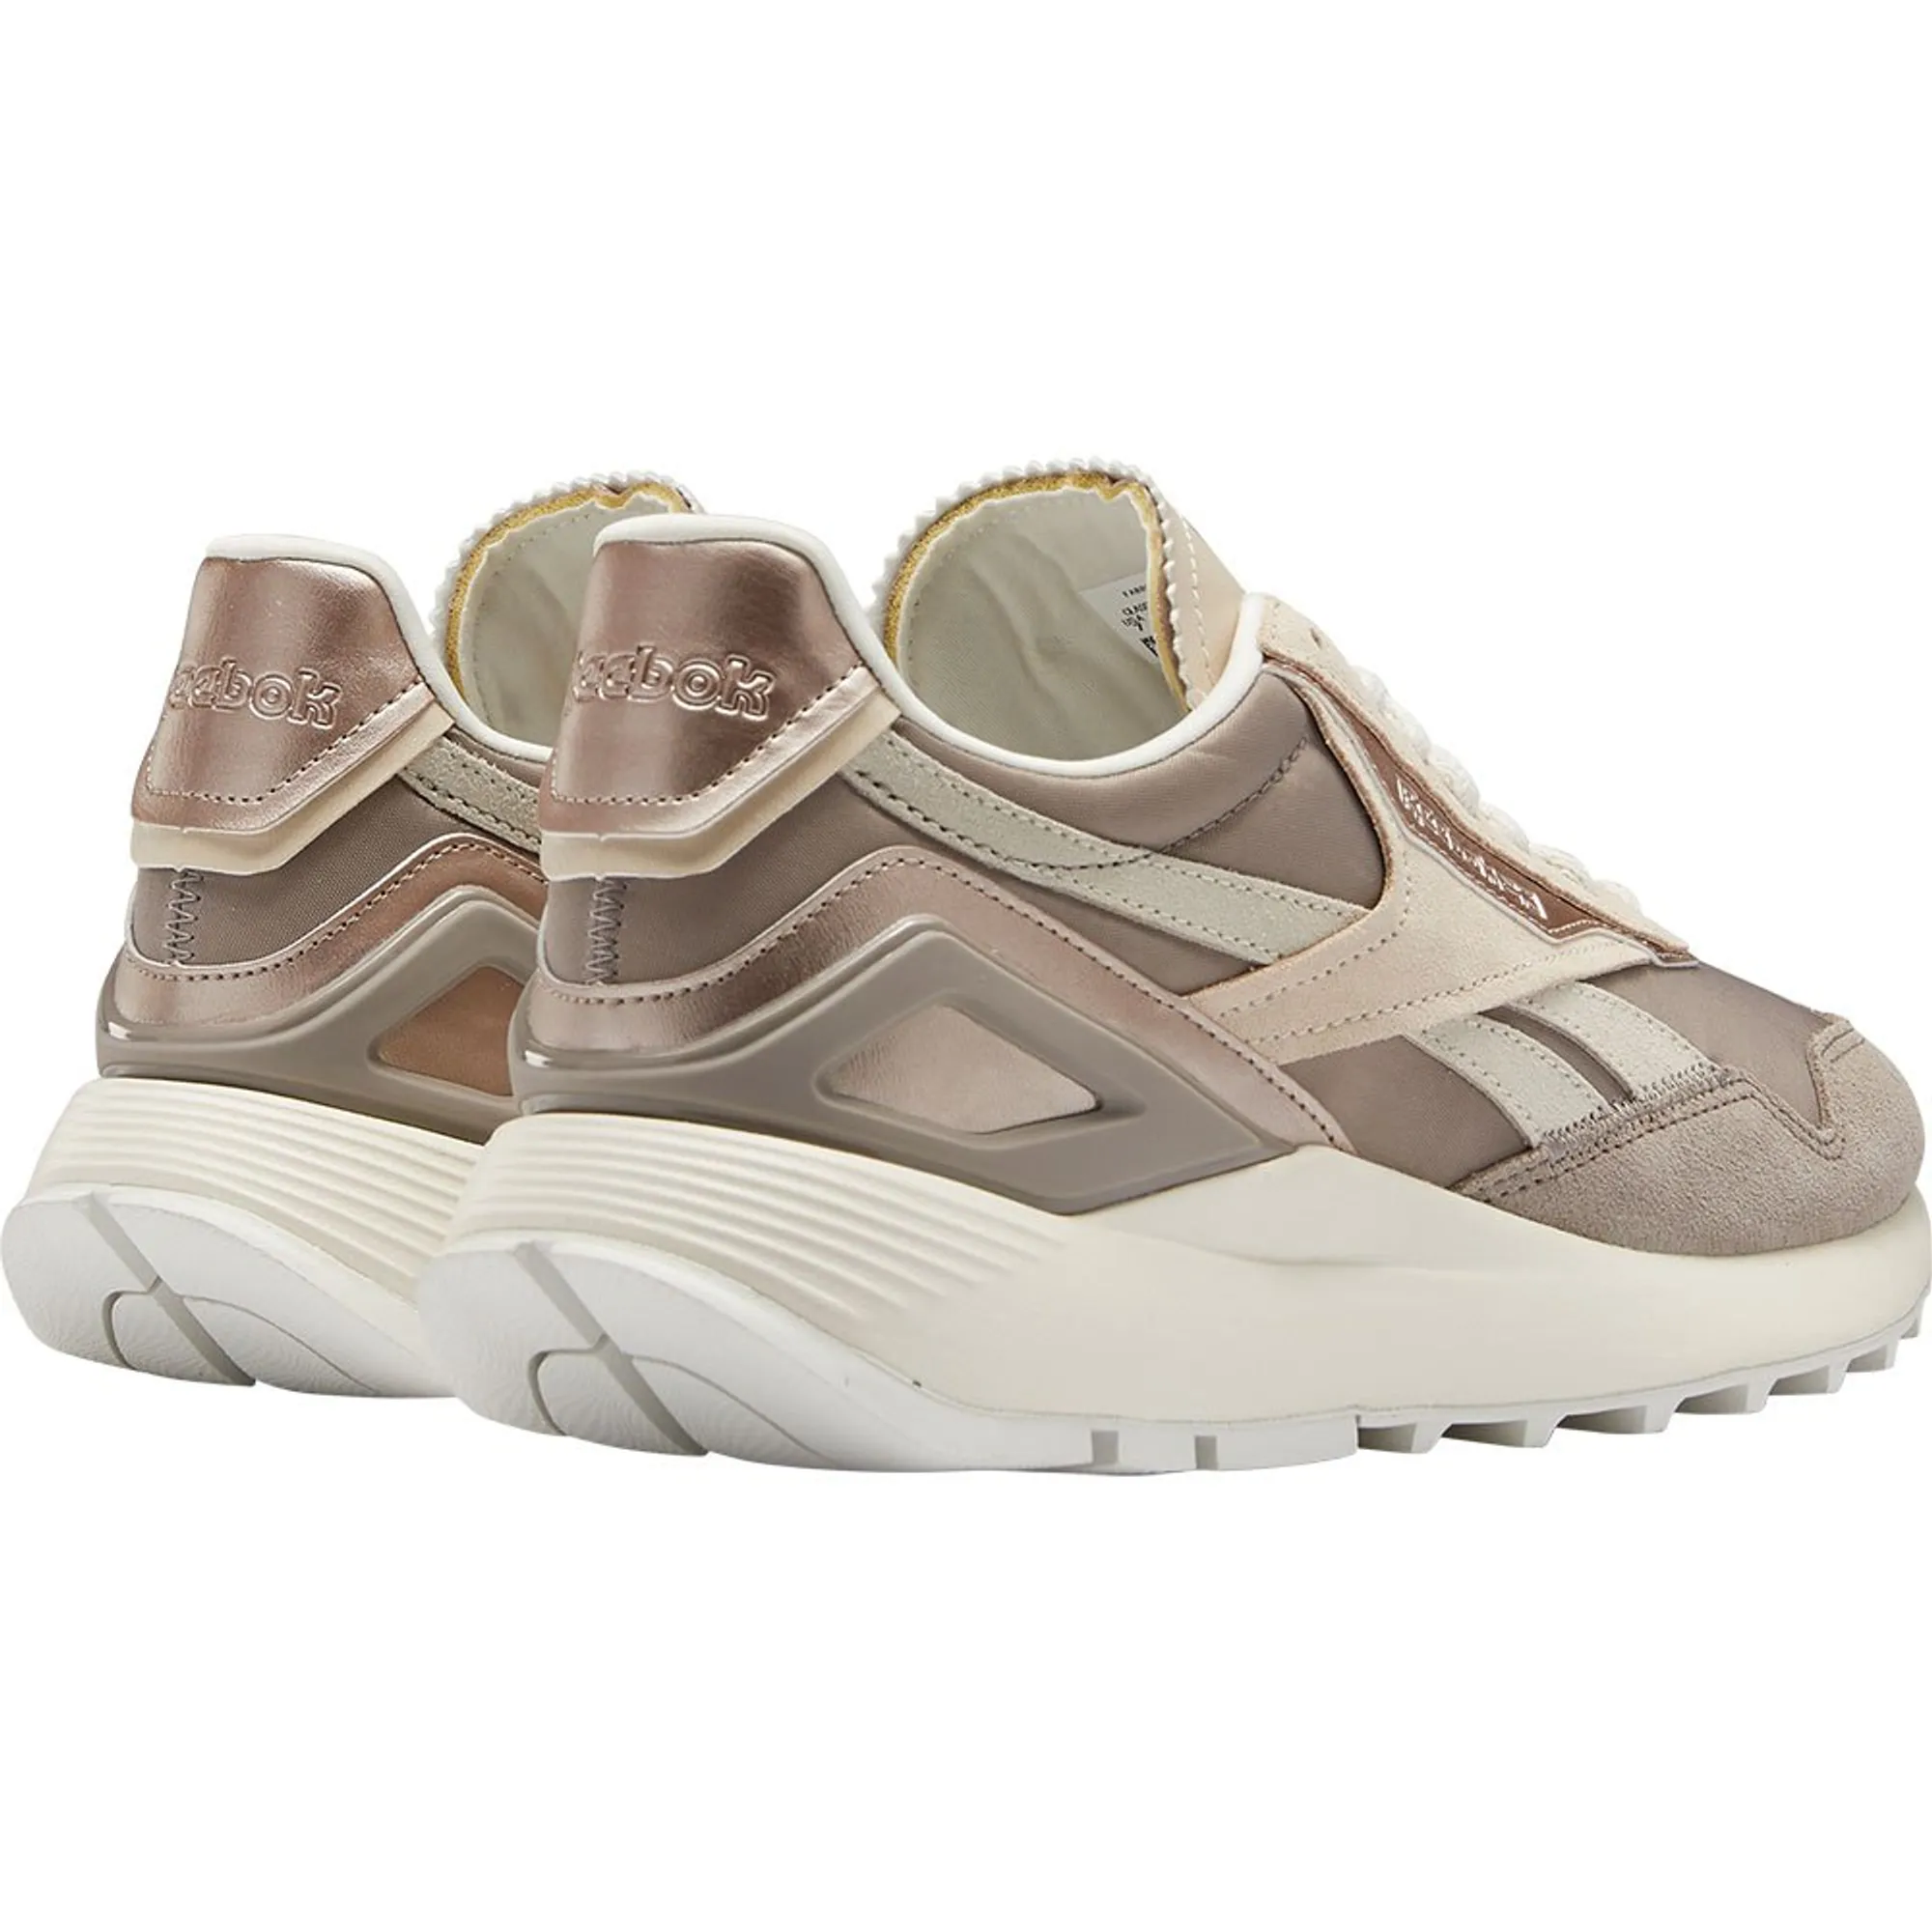 Reebok Classic Leather Shoes, Brown/White | GX4803 | FOOTY.COM